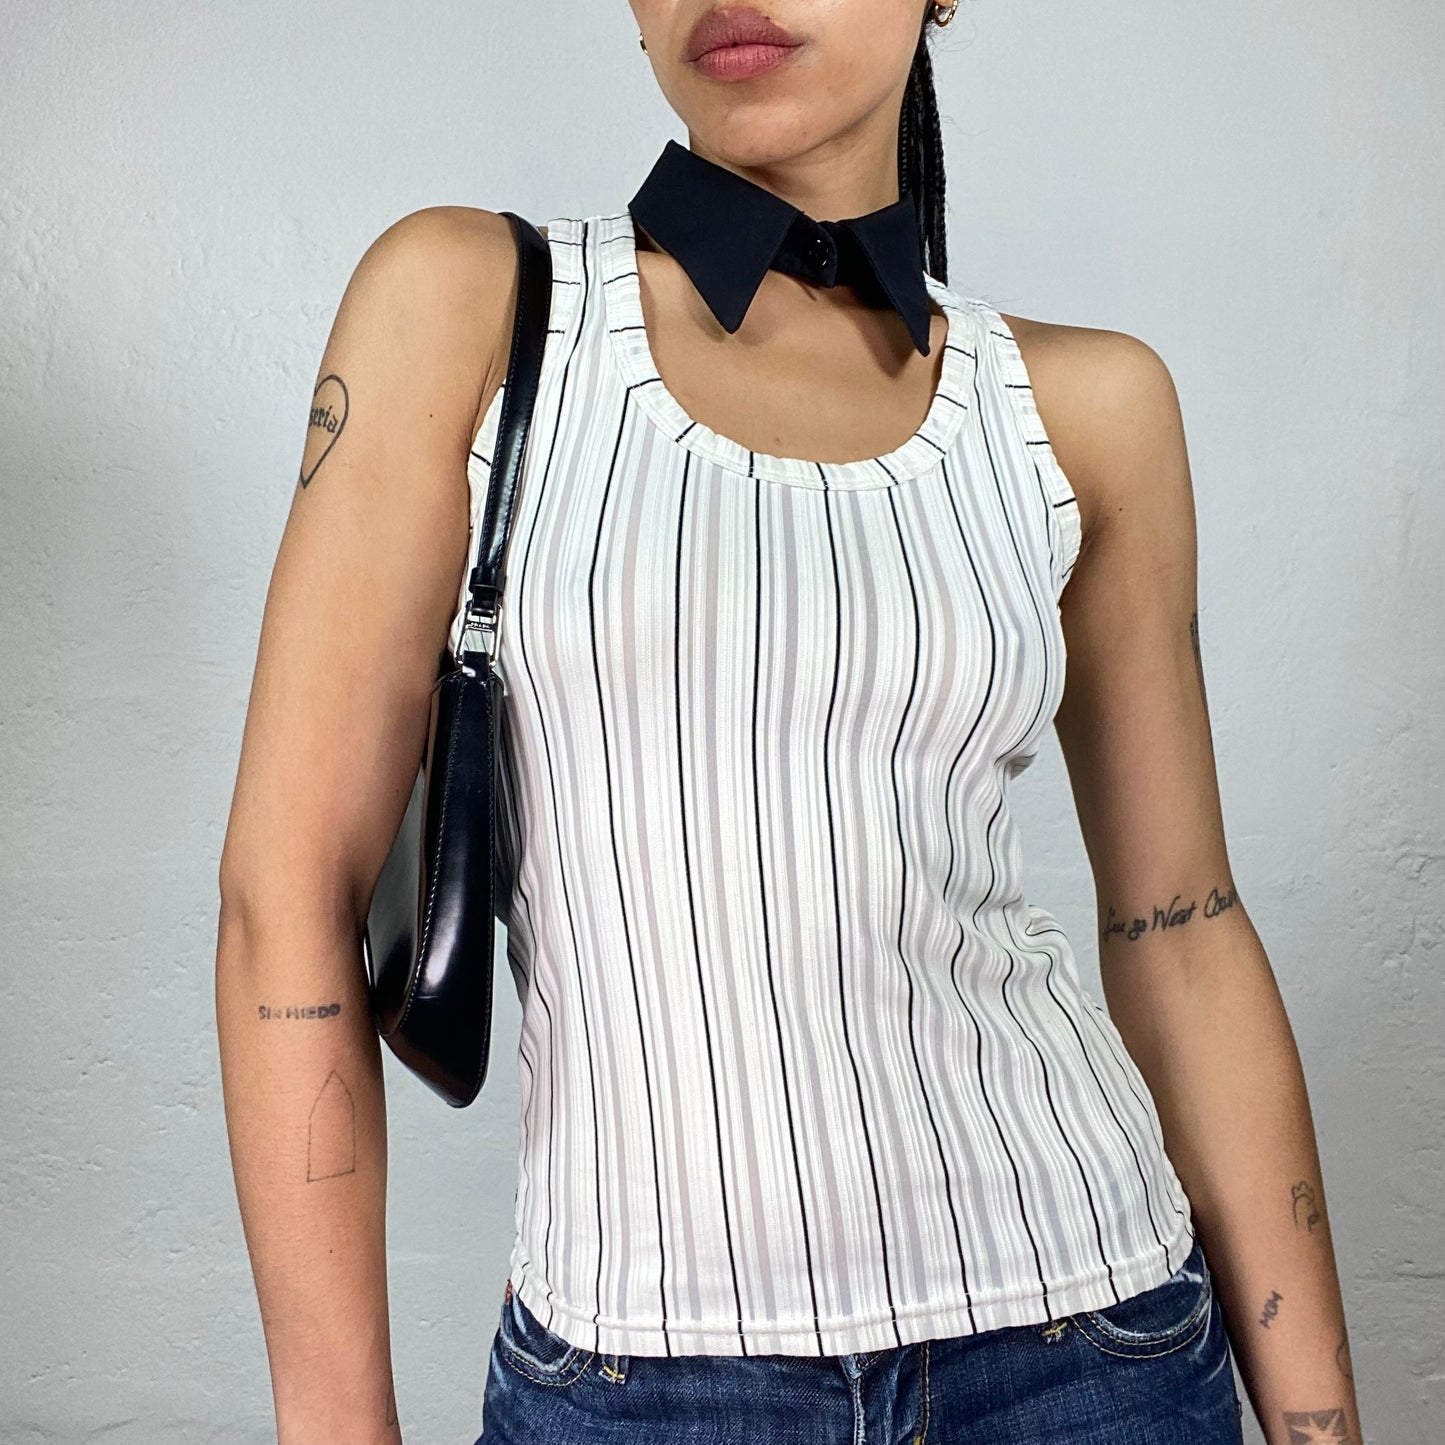 Vintage 2000's Funky White Striped Tank Top with Contrast Black Collar (M)